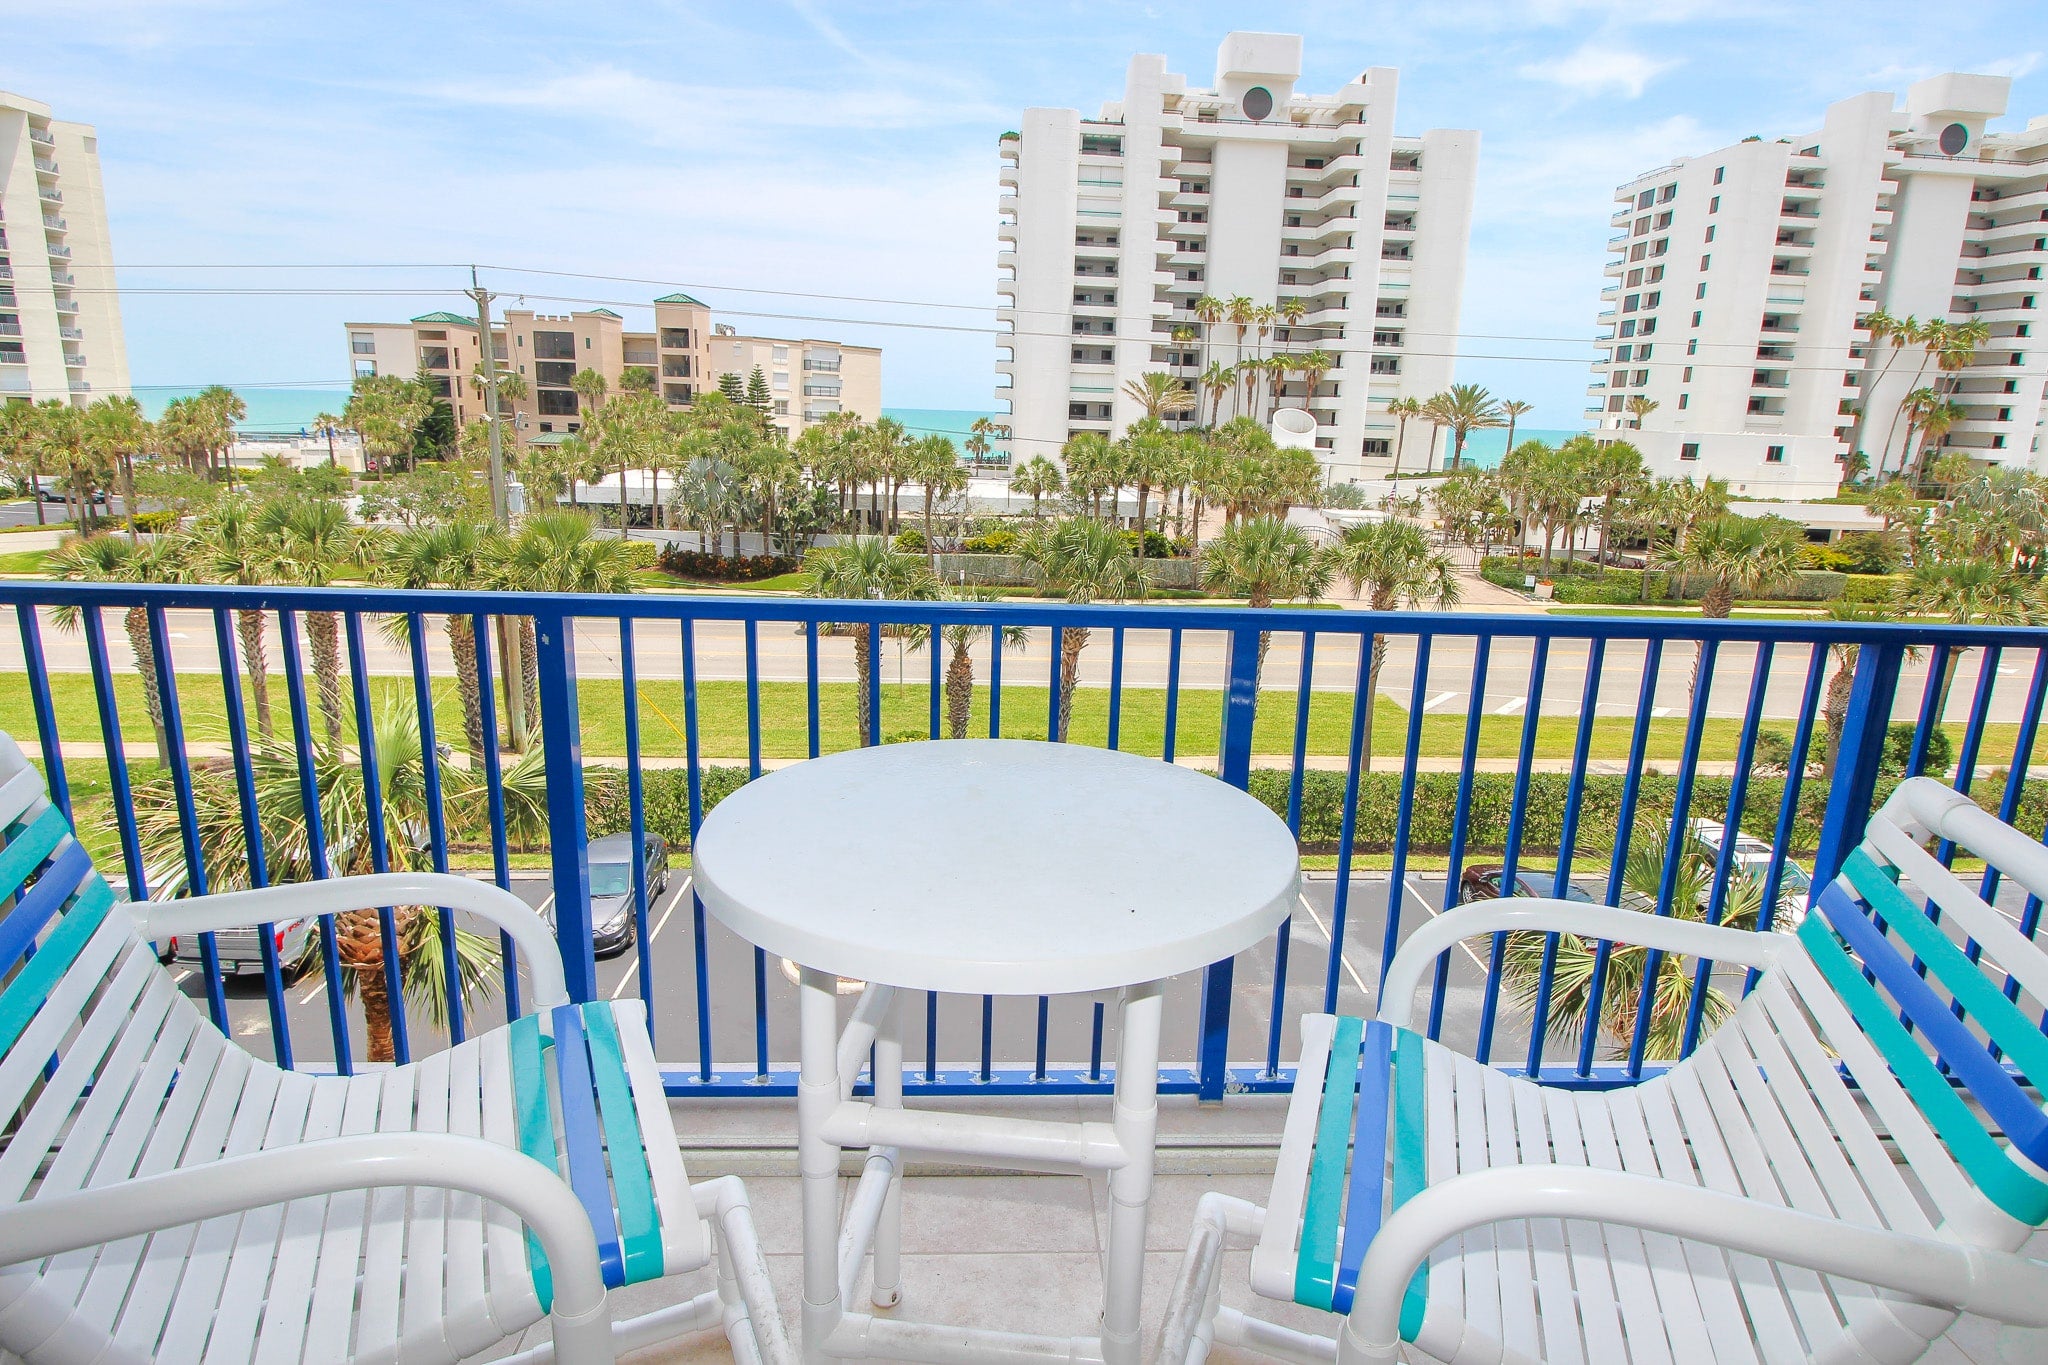 Sit back and relax in the Florida sun on the balcony